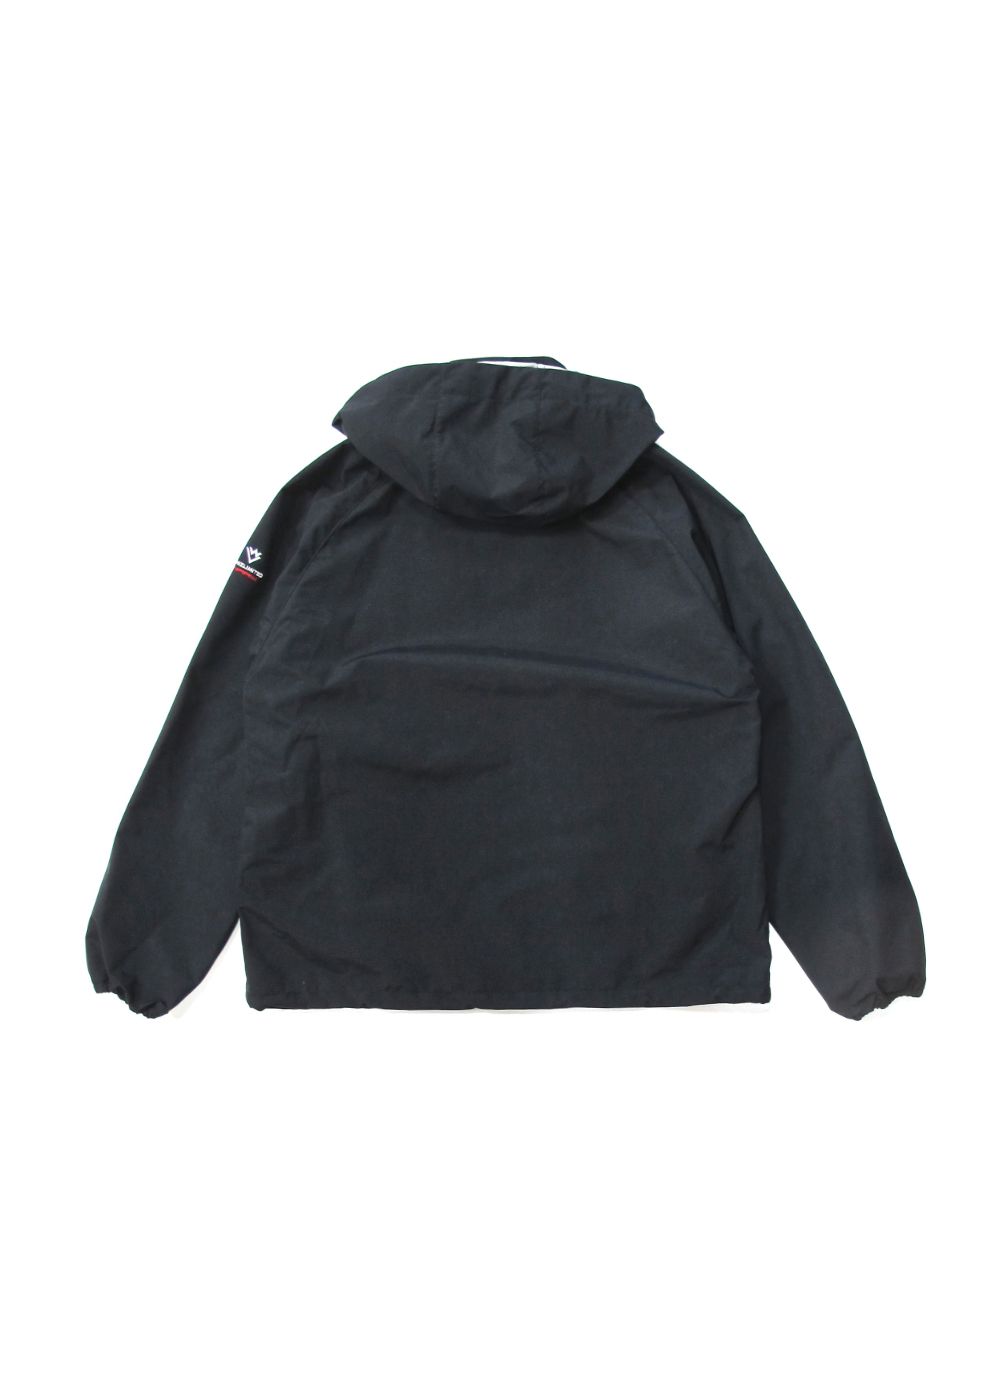 WHIZ LIMITED - SPECTOR JACKET (BLACK) / セットアップ マウンテン